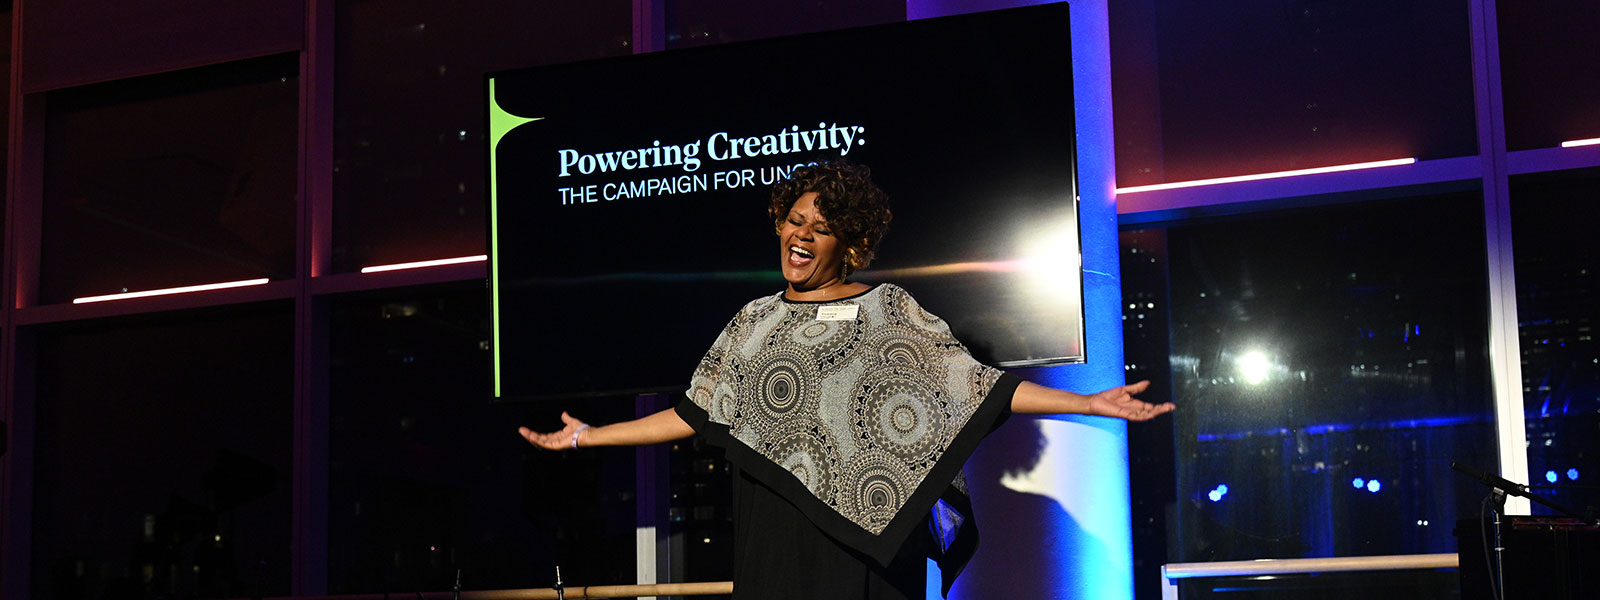 Alumna Tichina Vaughn at the "Powering Creativity" campaign launch event in New York / Photo: Chris Lee